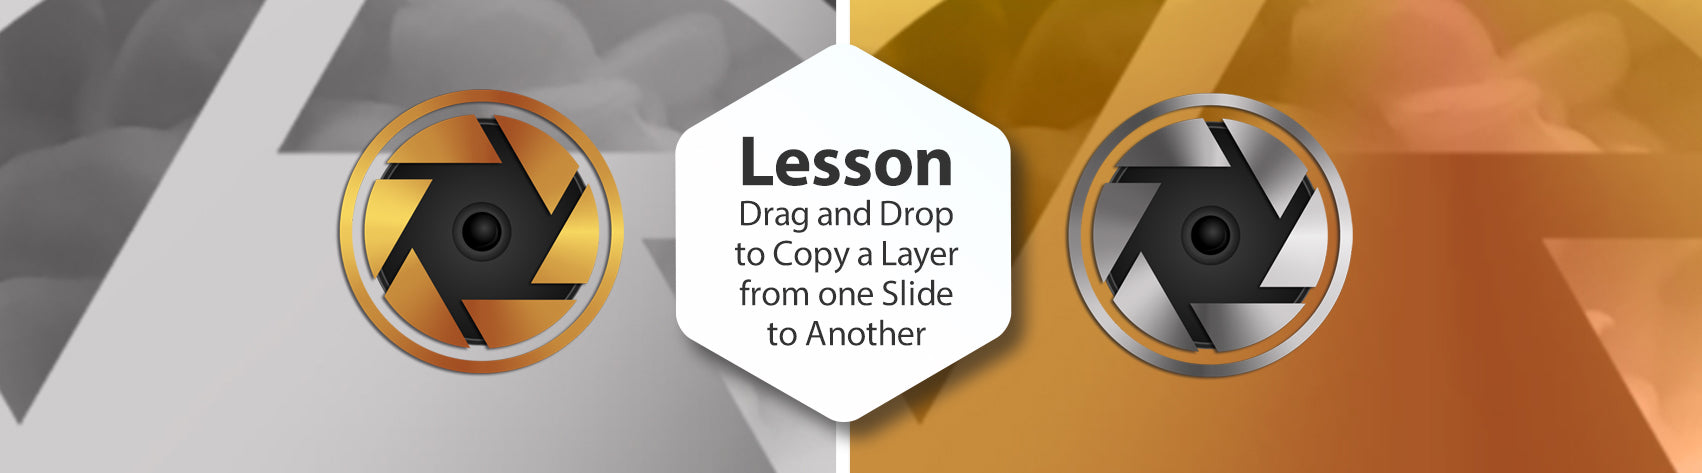 Lesson - Drag and Drop to Copy a Layer from one Slide to Another